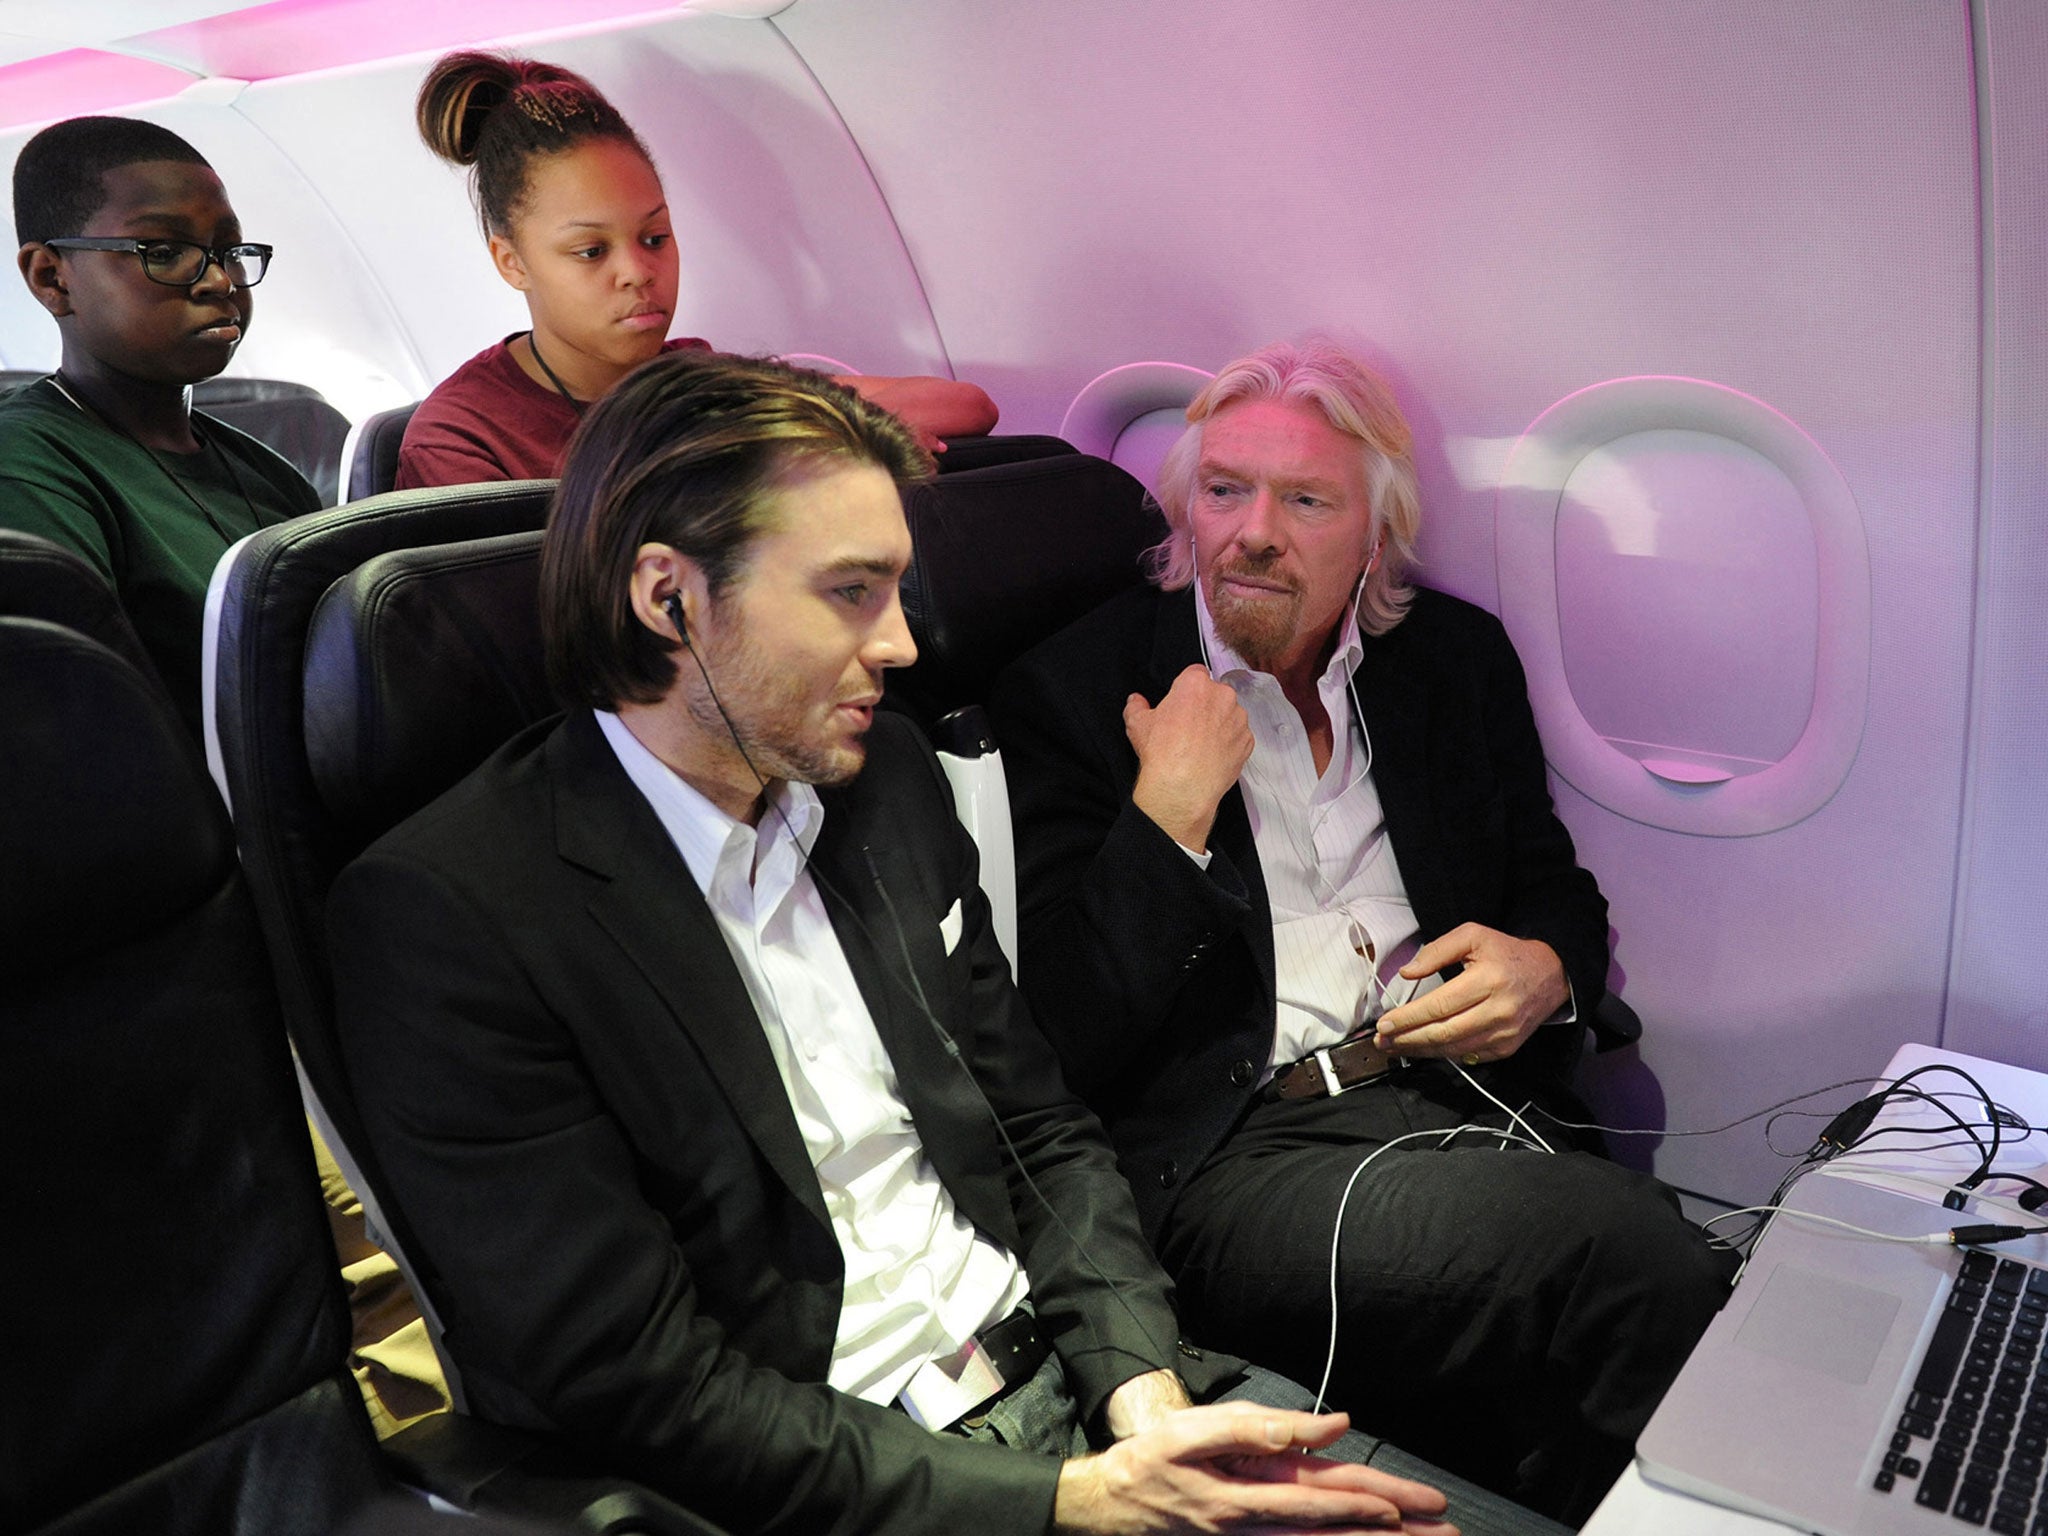 Mashable CEO & founder Pete Cashmore Founder talks business with Sir Richard Branson (right)